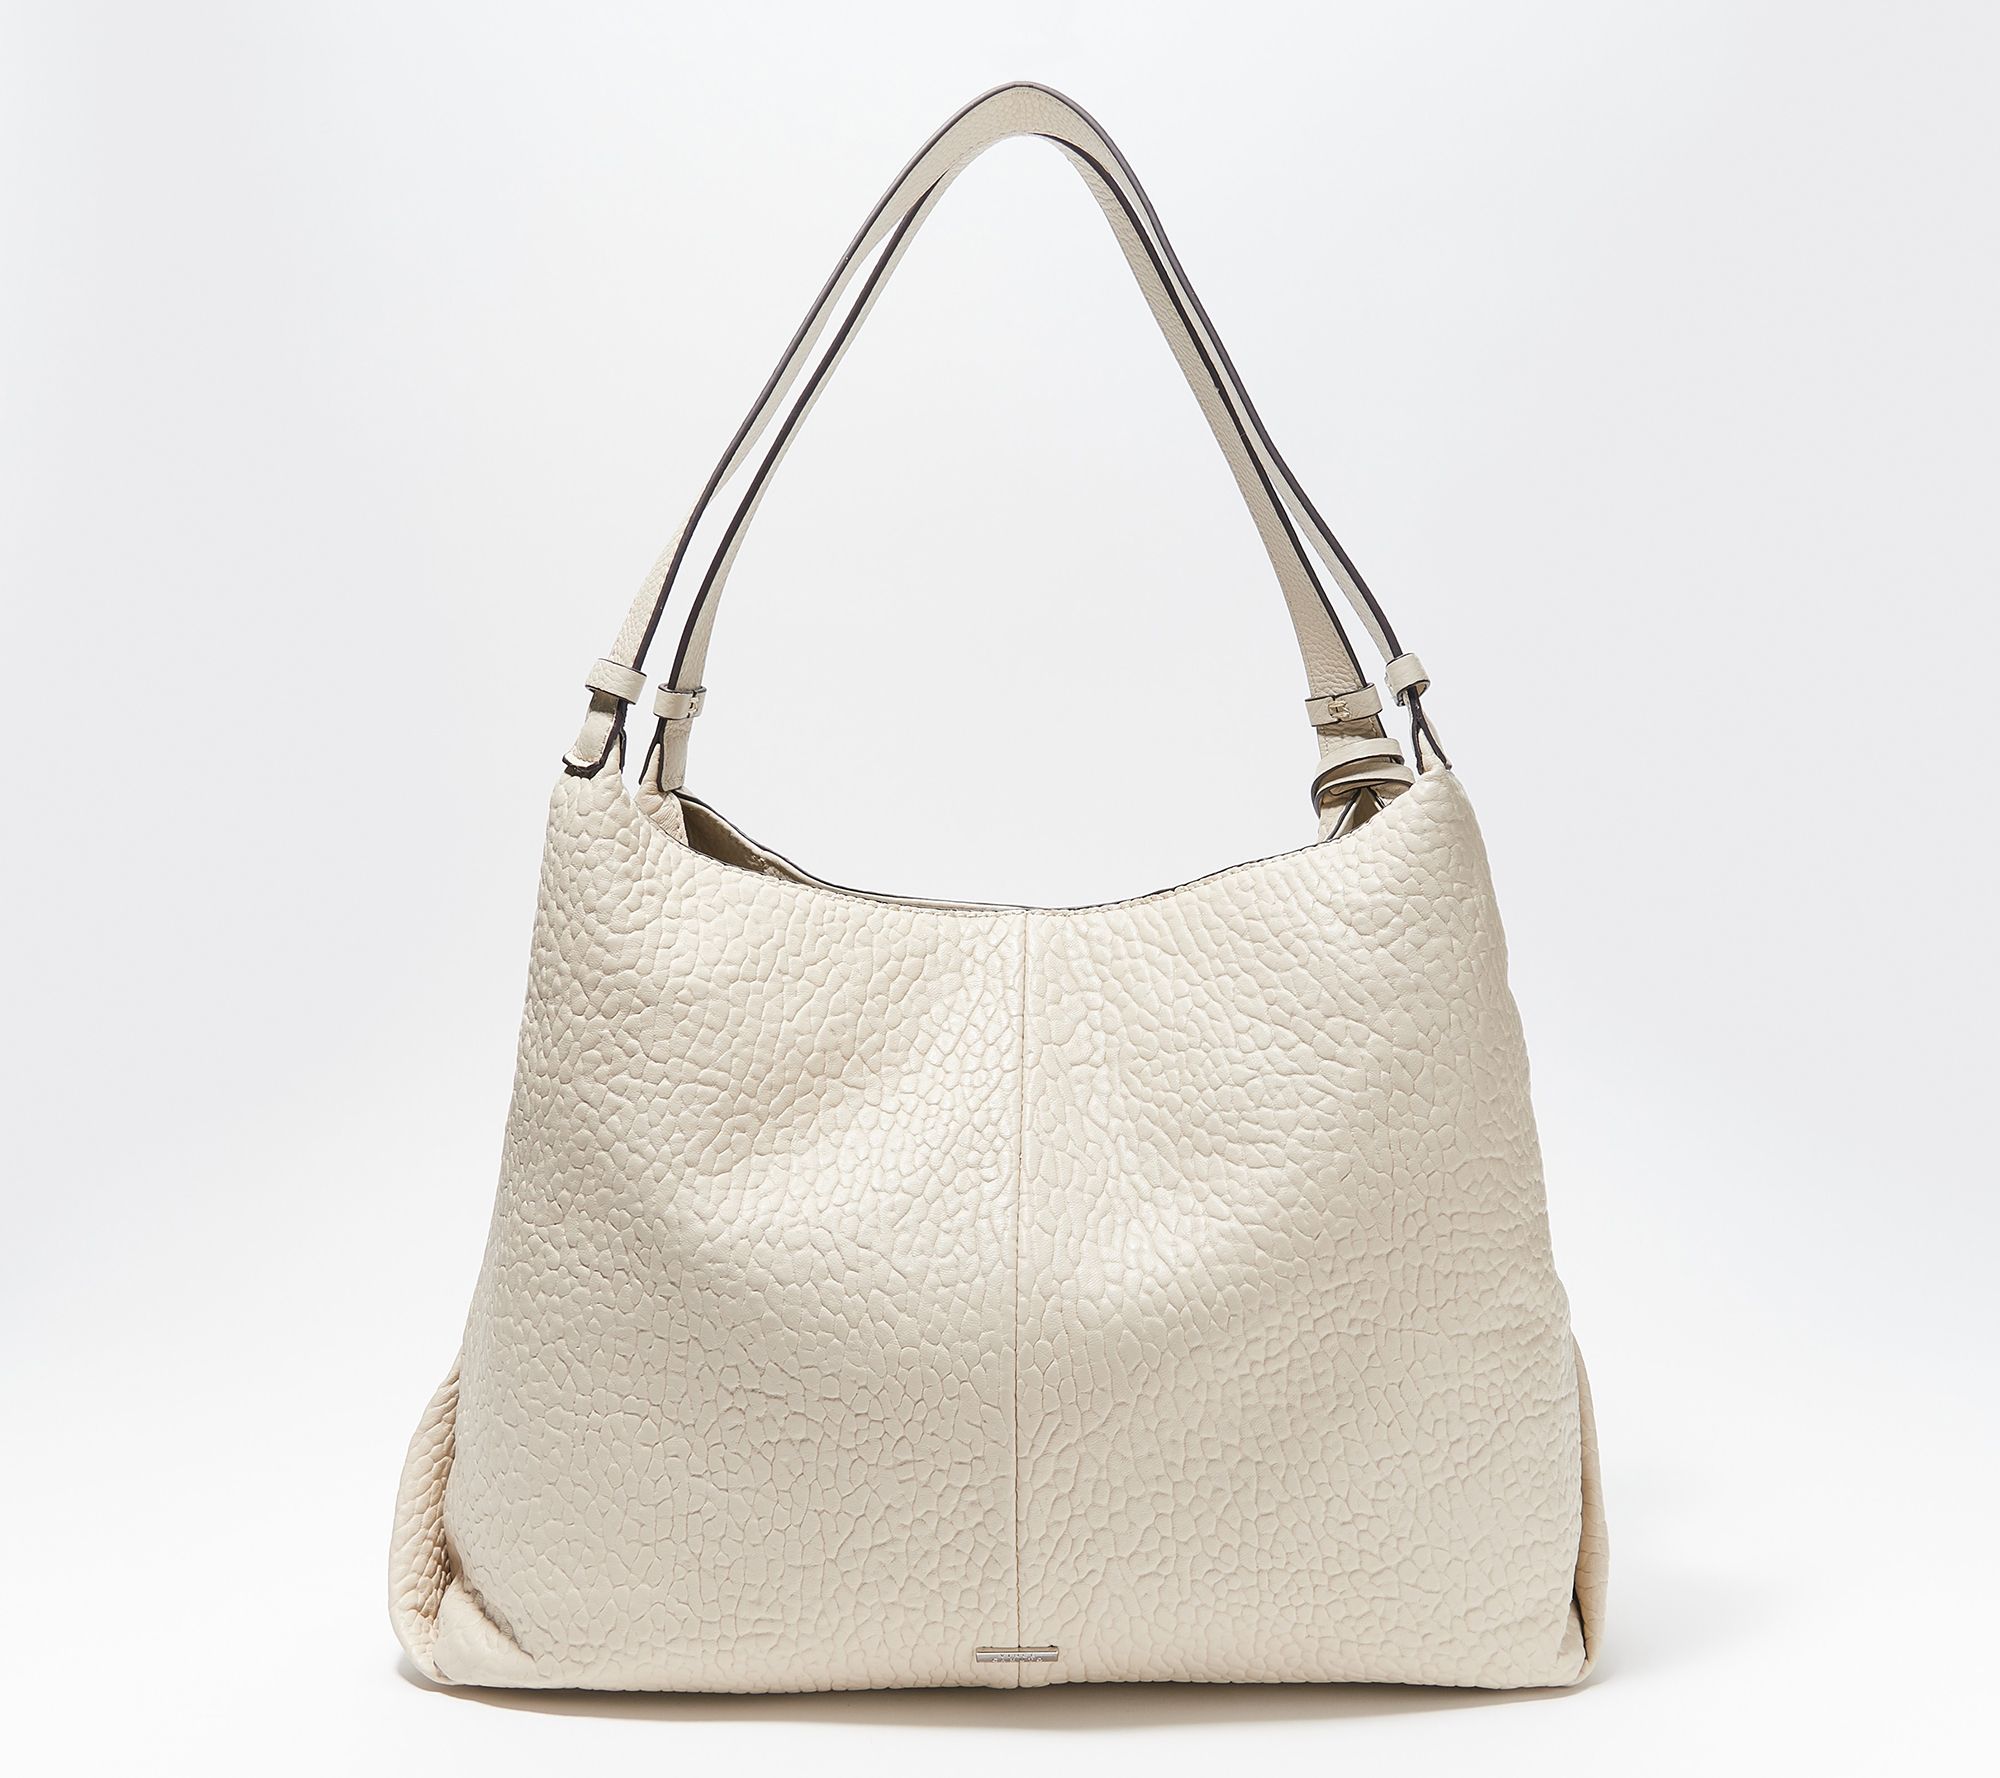 Vince Camuto Convertible Leather Tote - Tania